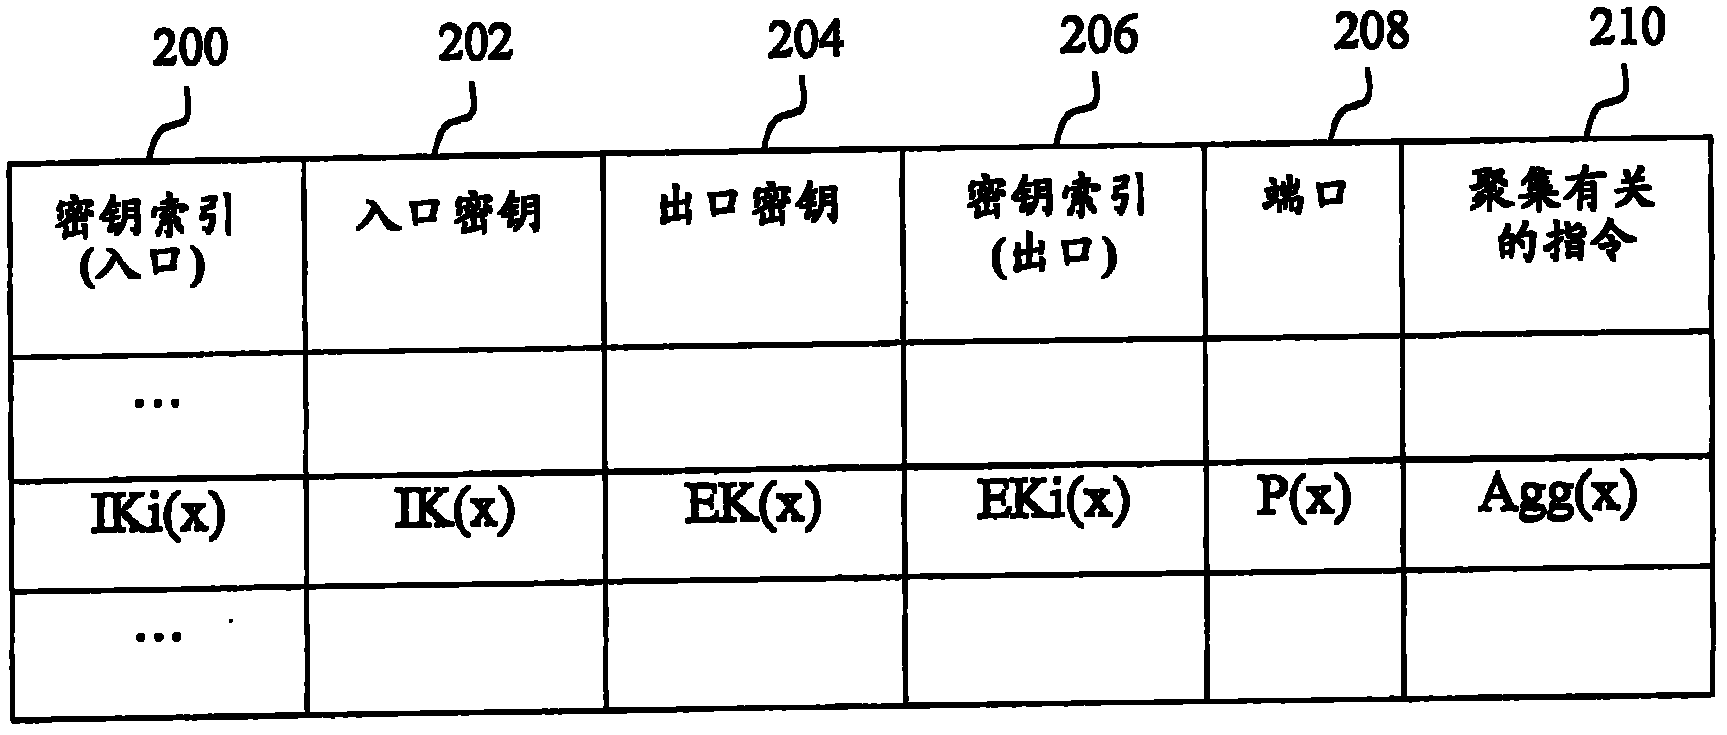 Method and apparatus for forwarding data packets using aggregating router keys